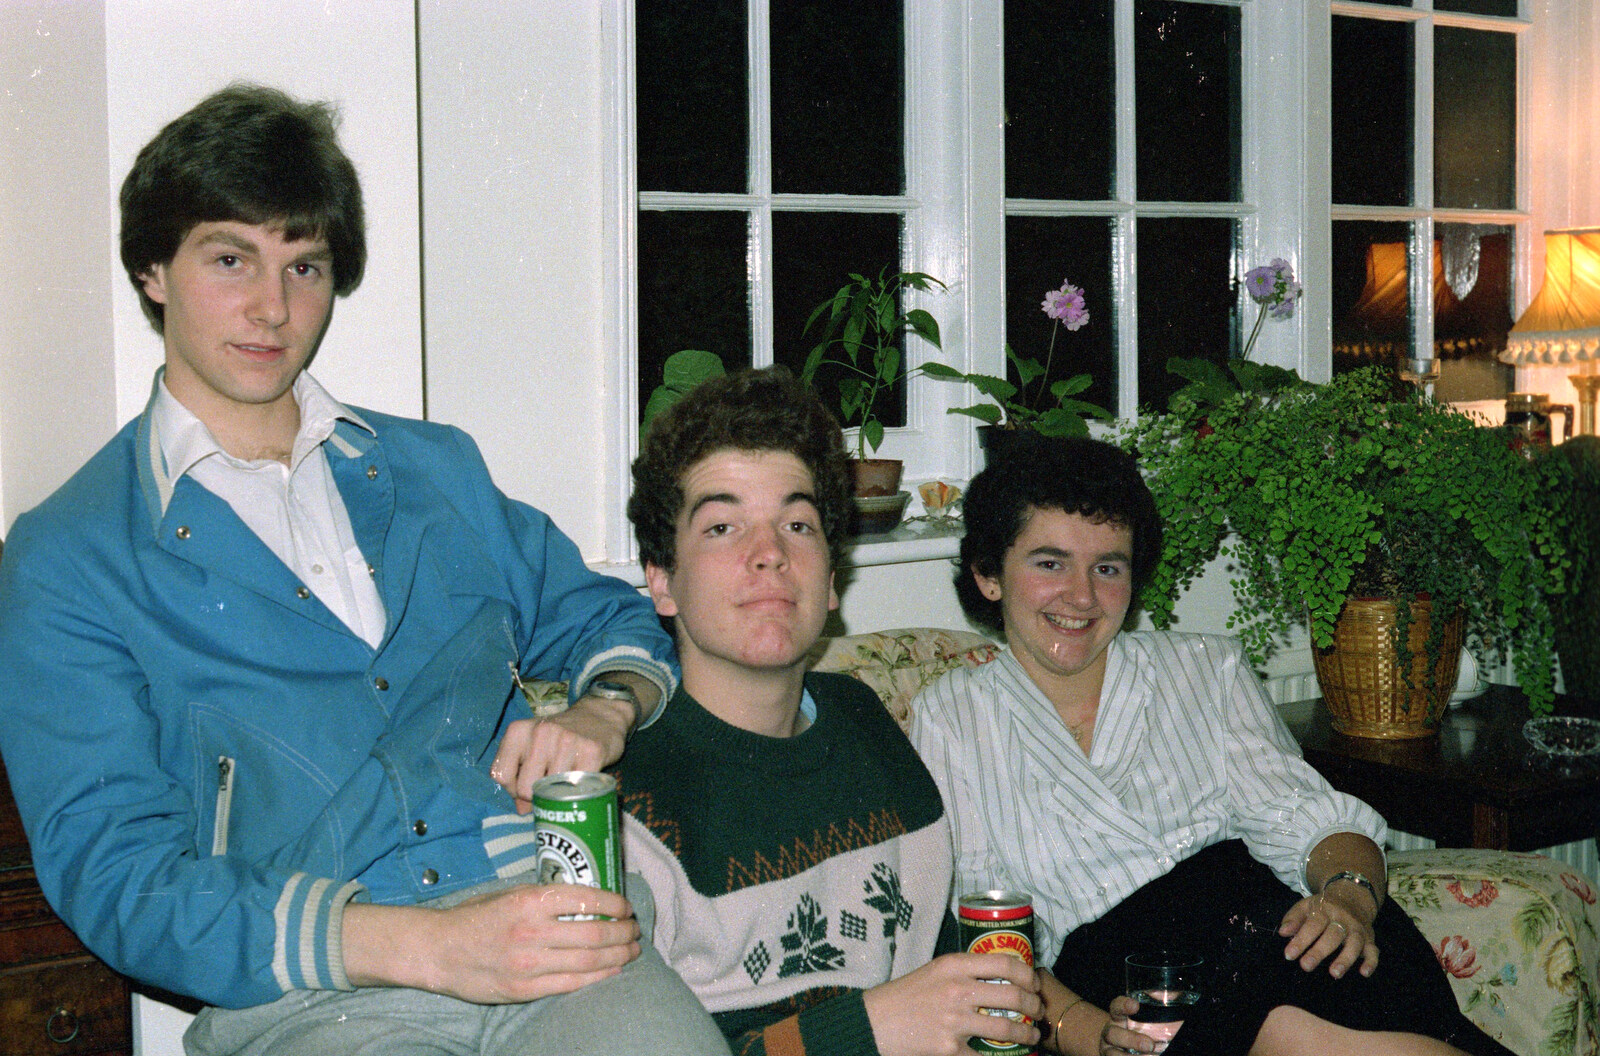 Sean, Jon and Liz in Ford Cottage from The Last Day of Term, and Leaving New Milton, Hampshire - 18th September 1985